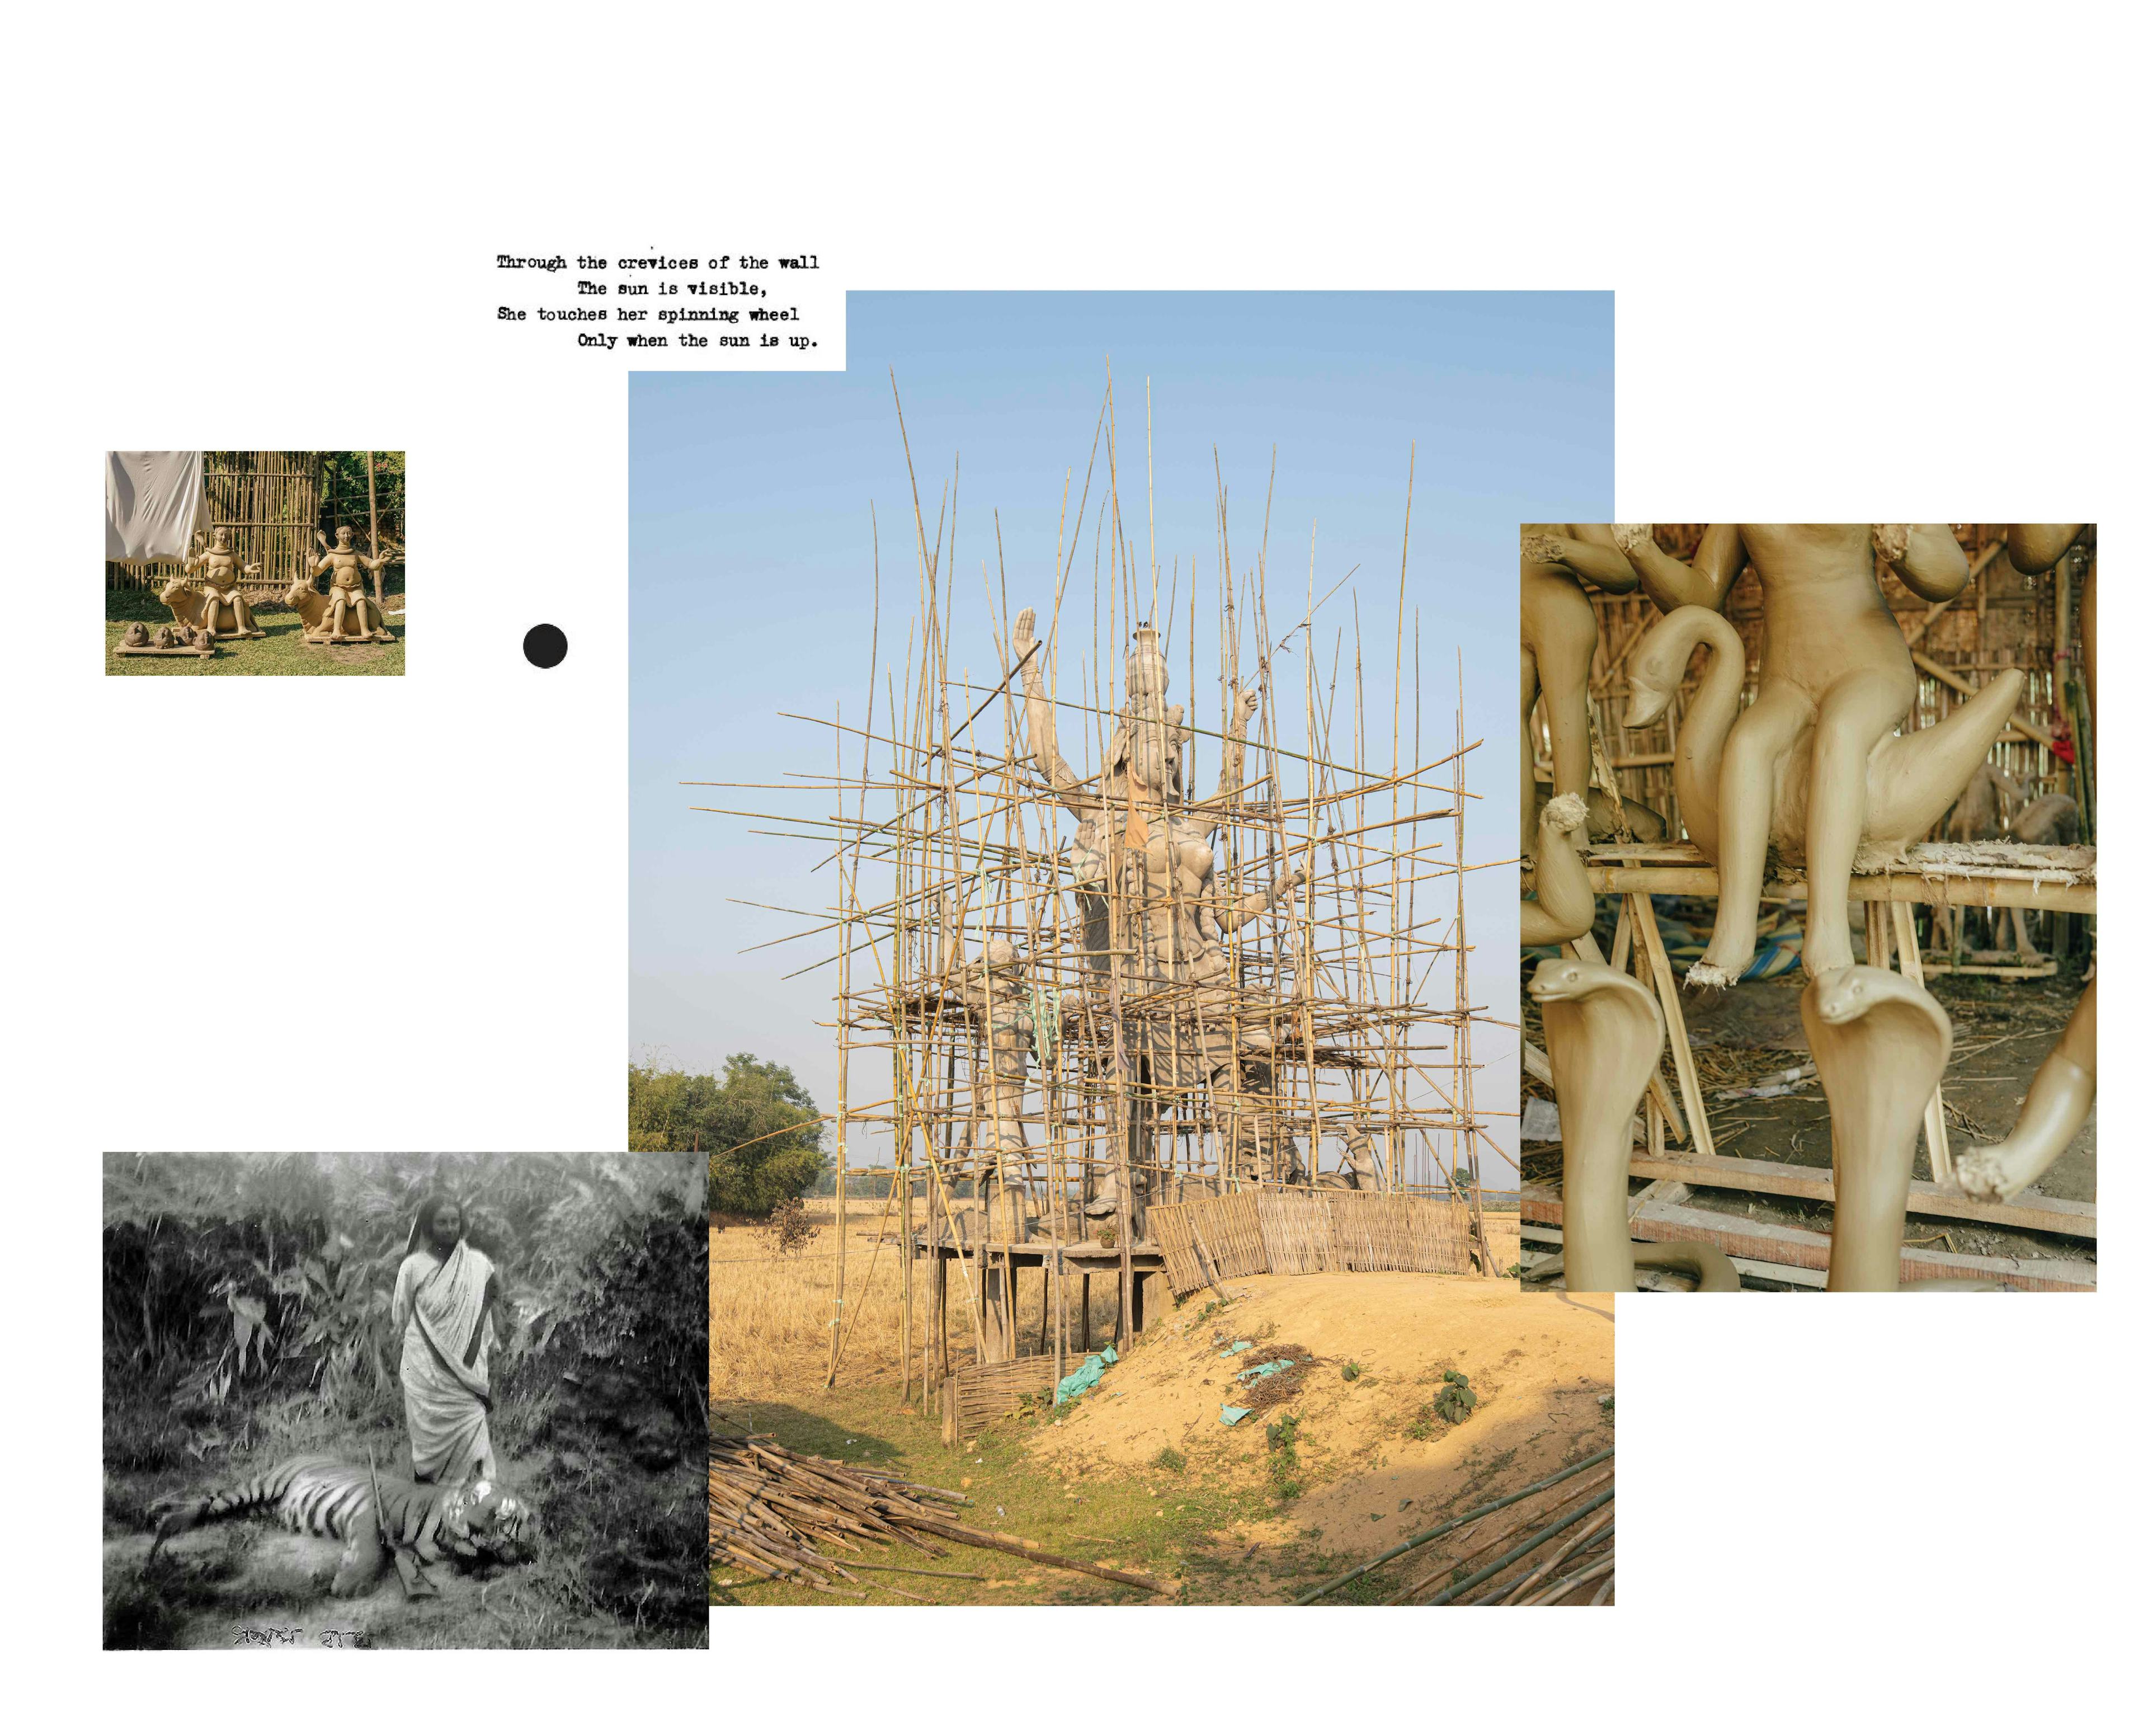 Collage of images and text showing a snake sculpture covered in scaffolding. © Akshay Mahajan